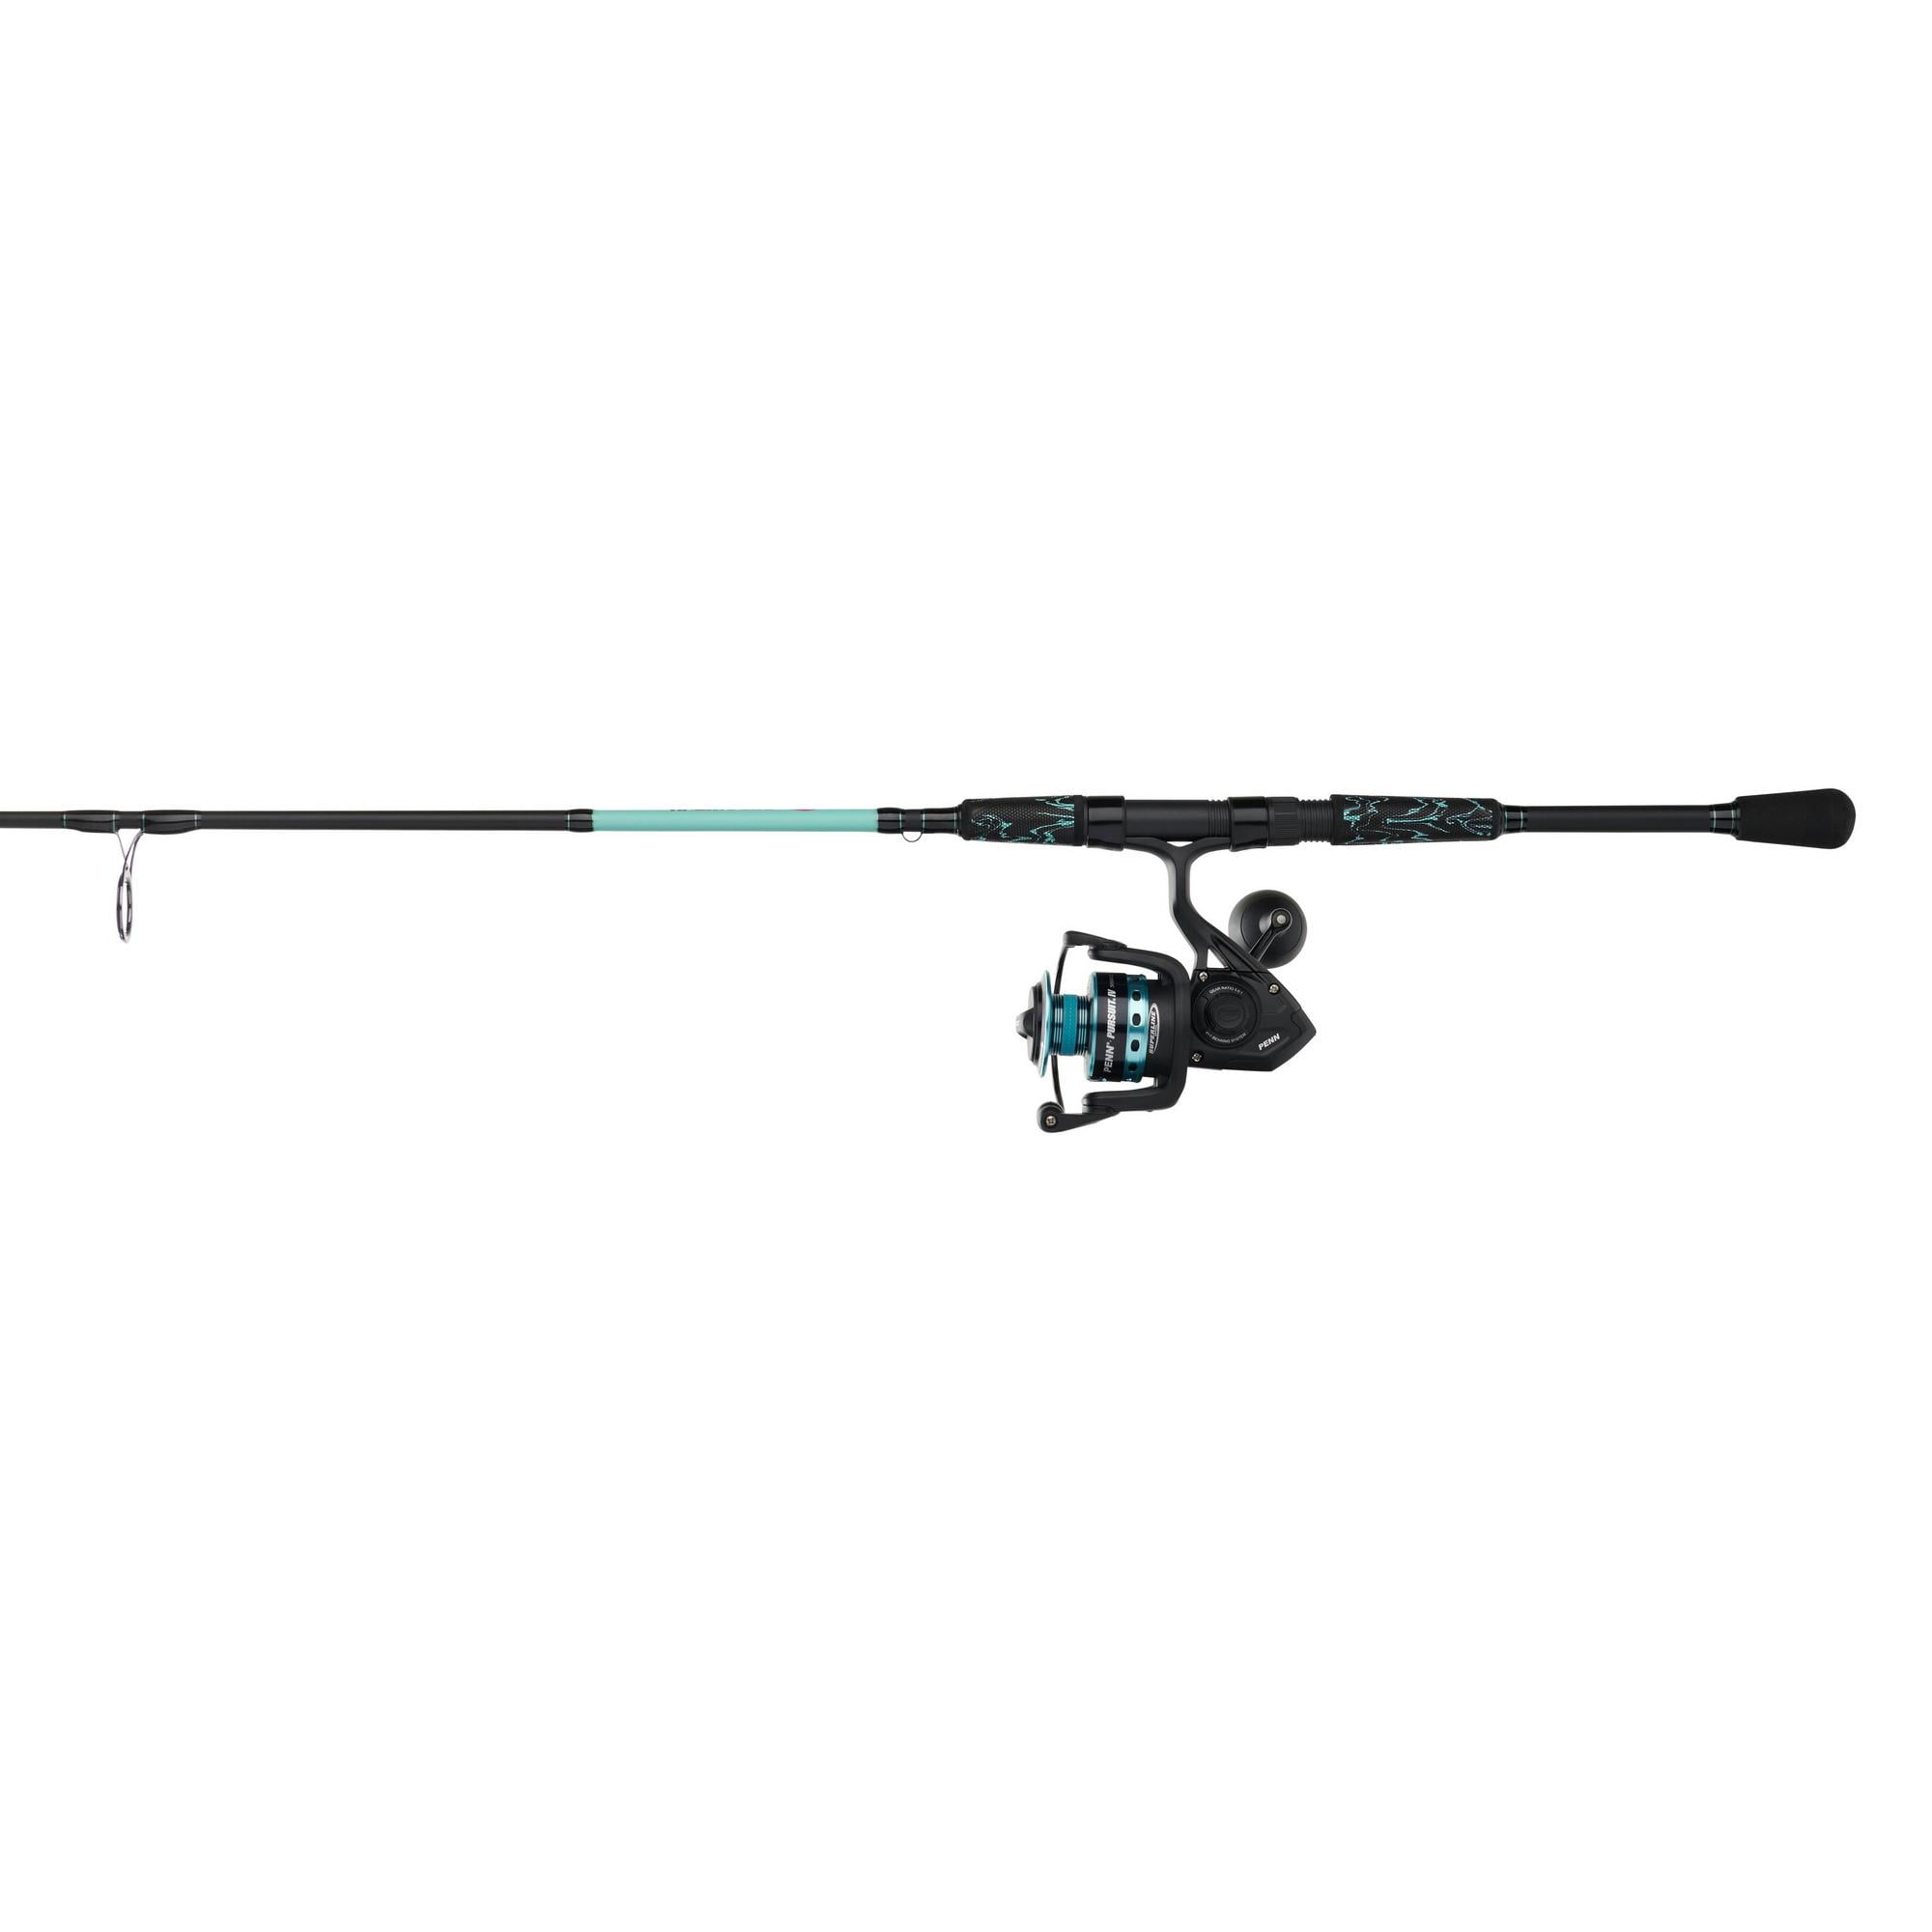 PENN 7' Pursuit IV LE Fishing Rod and Reel Spinning Combo